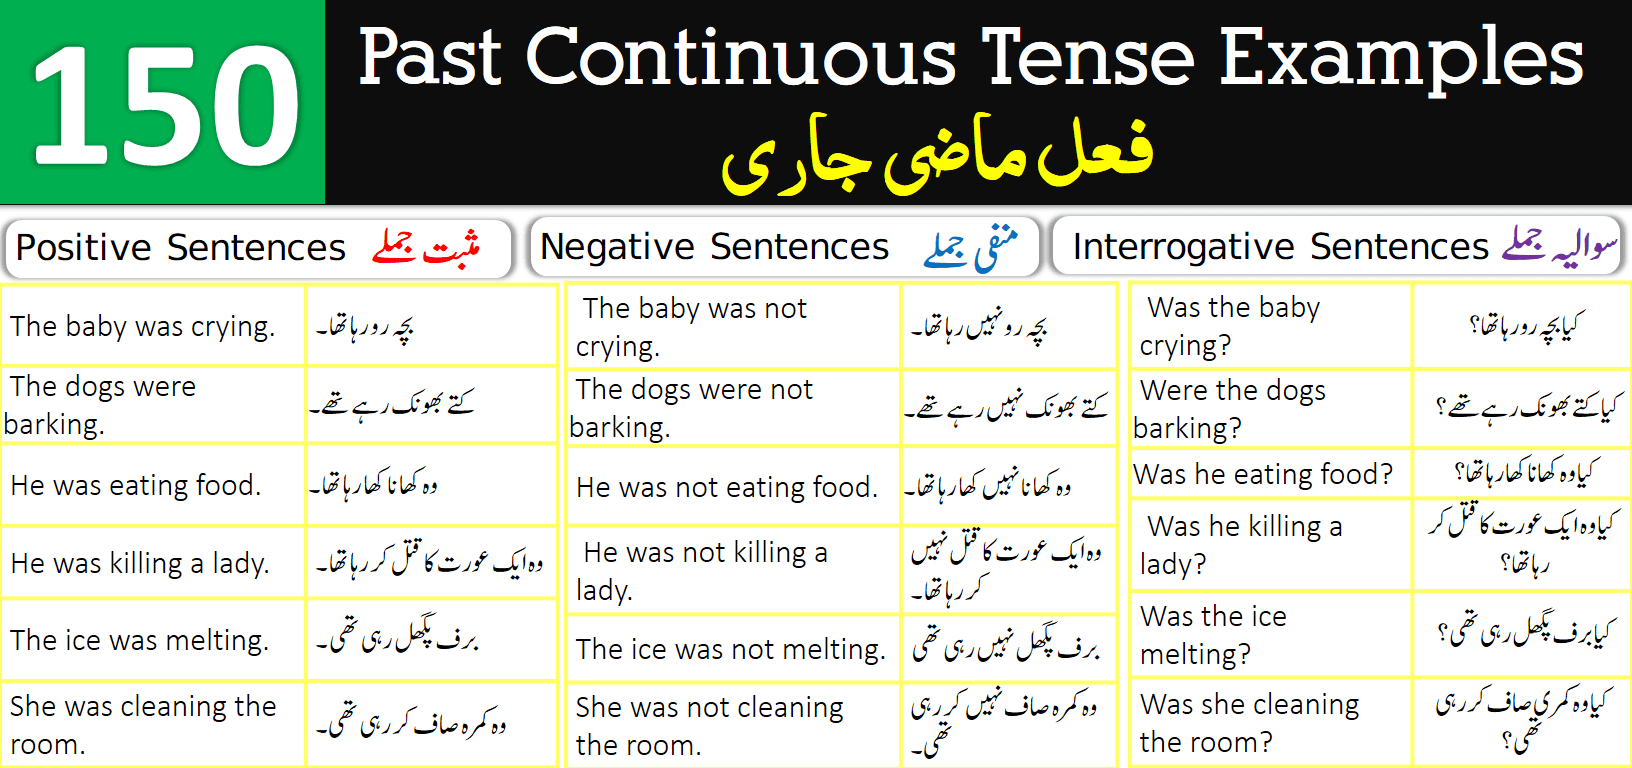 150 Example Sentences for Past Continuous Tense with Urdu Translation